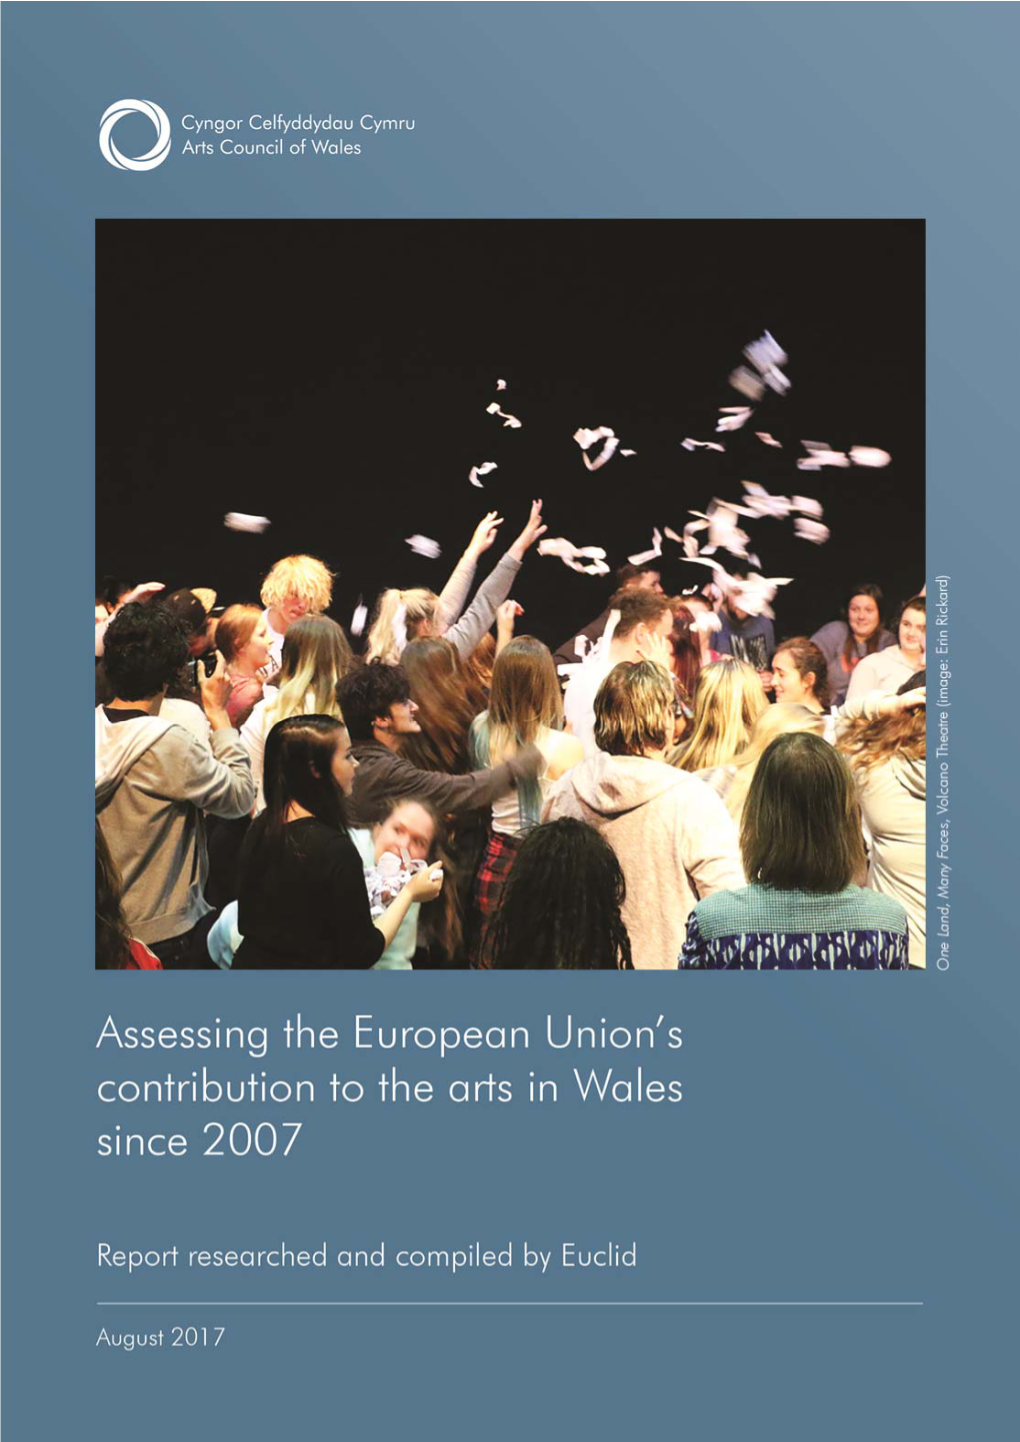 Assessing the European Union's Contribution to the Arts in Wales Since 2007